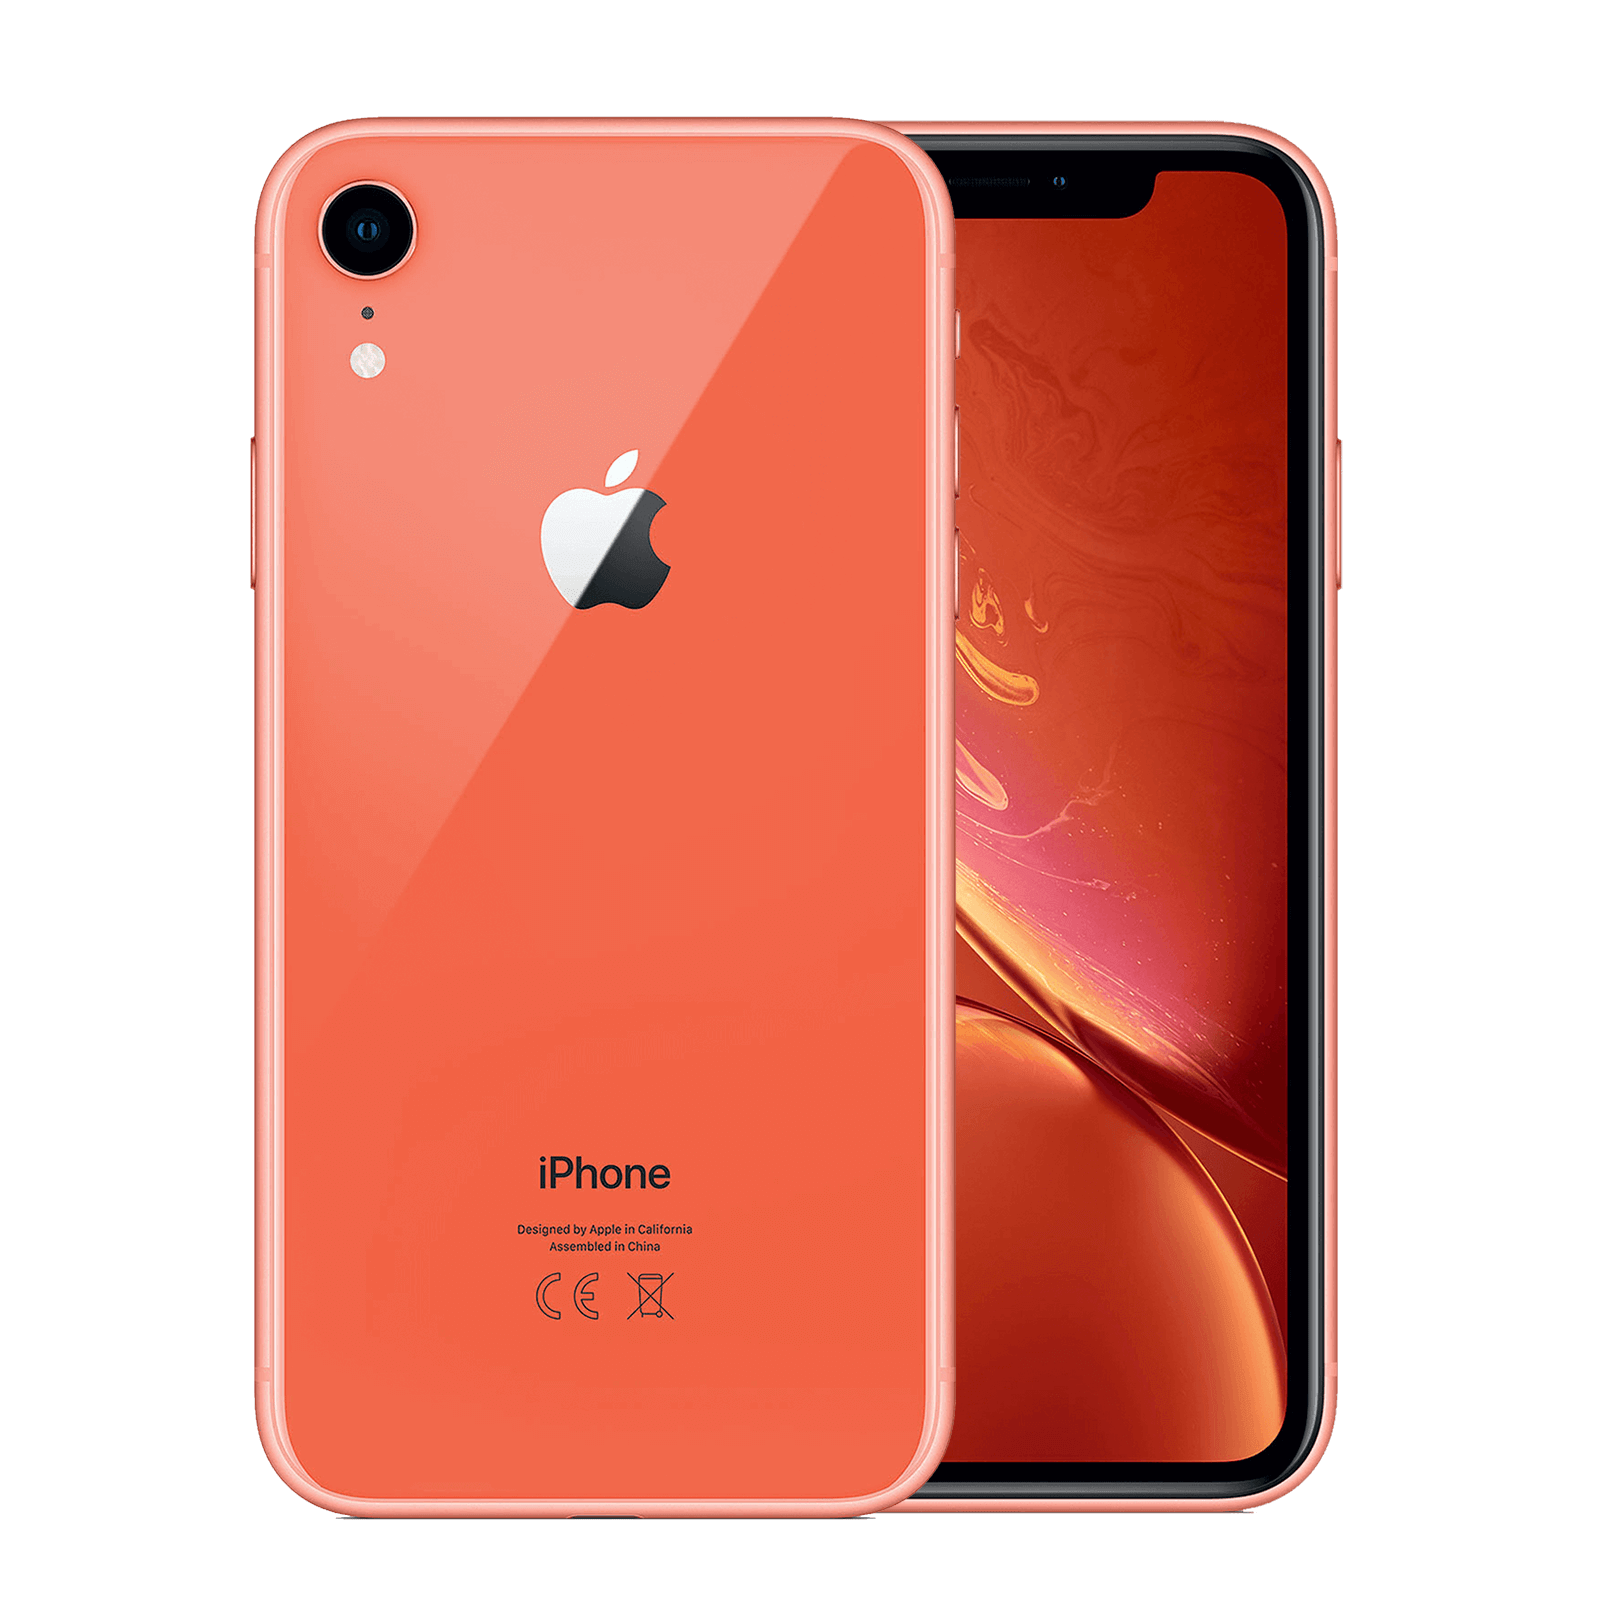 Apple iPhone XR 128GB Coral Good - T-Mobile